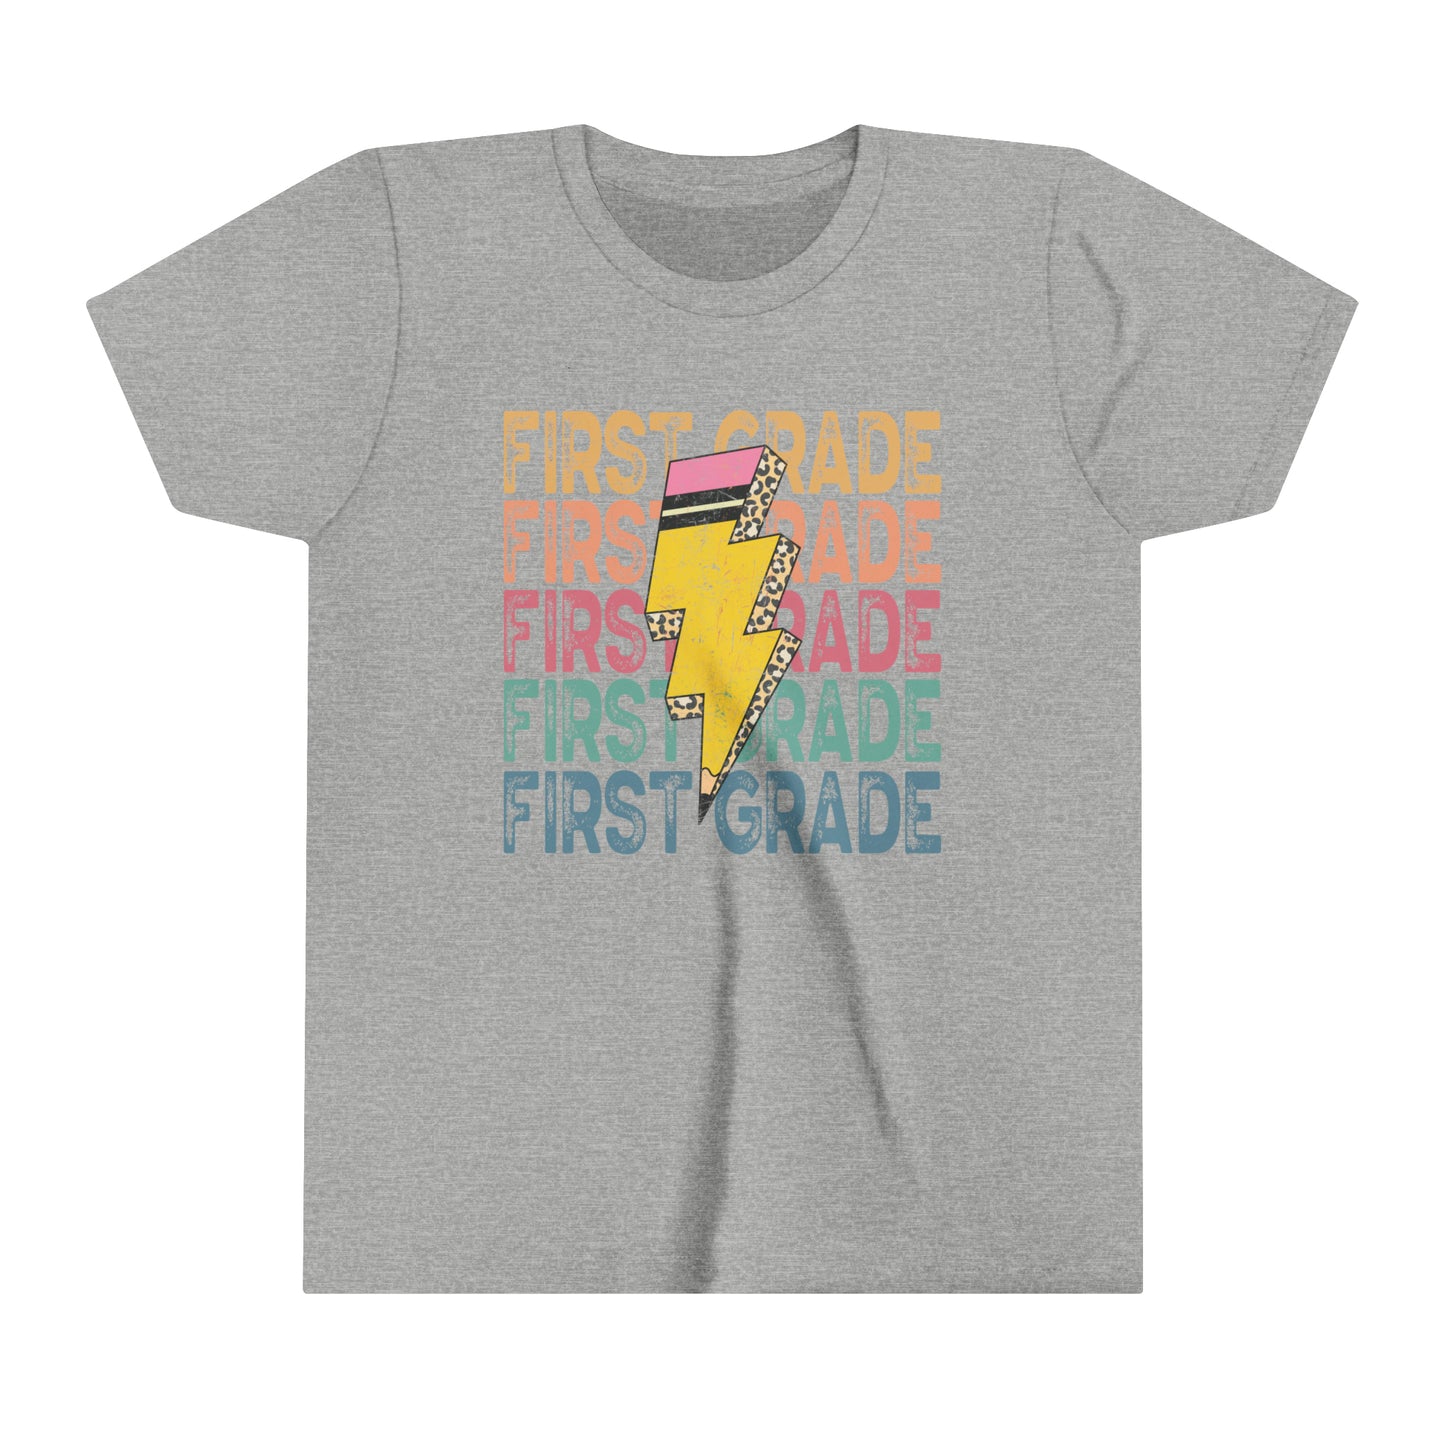 First Grade Girl's Youth Short Sleeve Tee